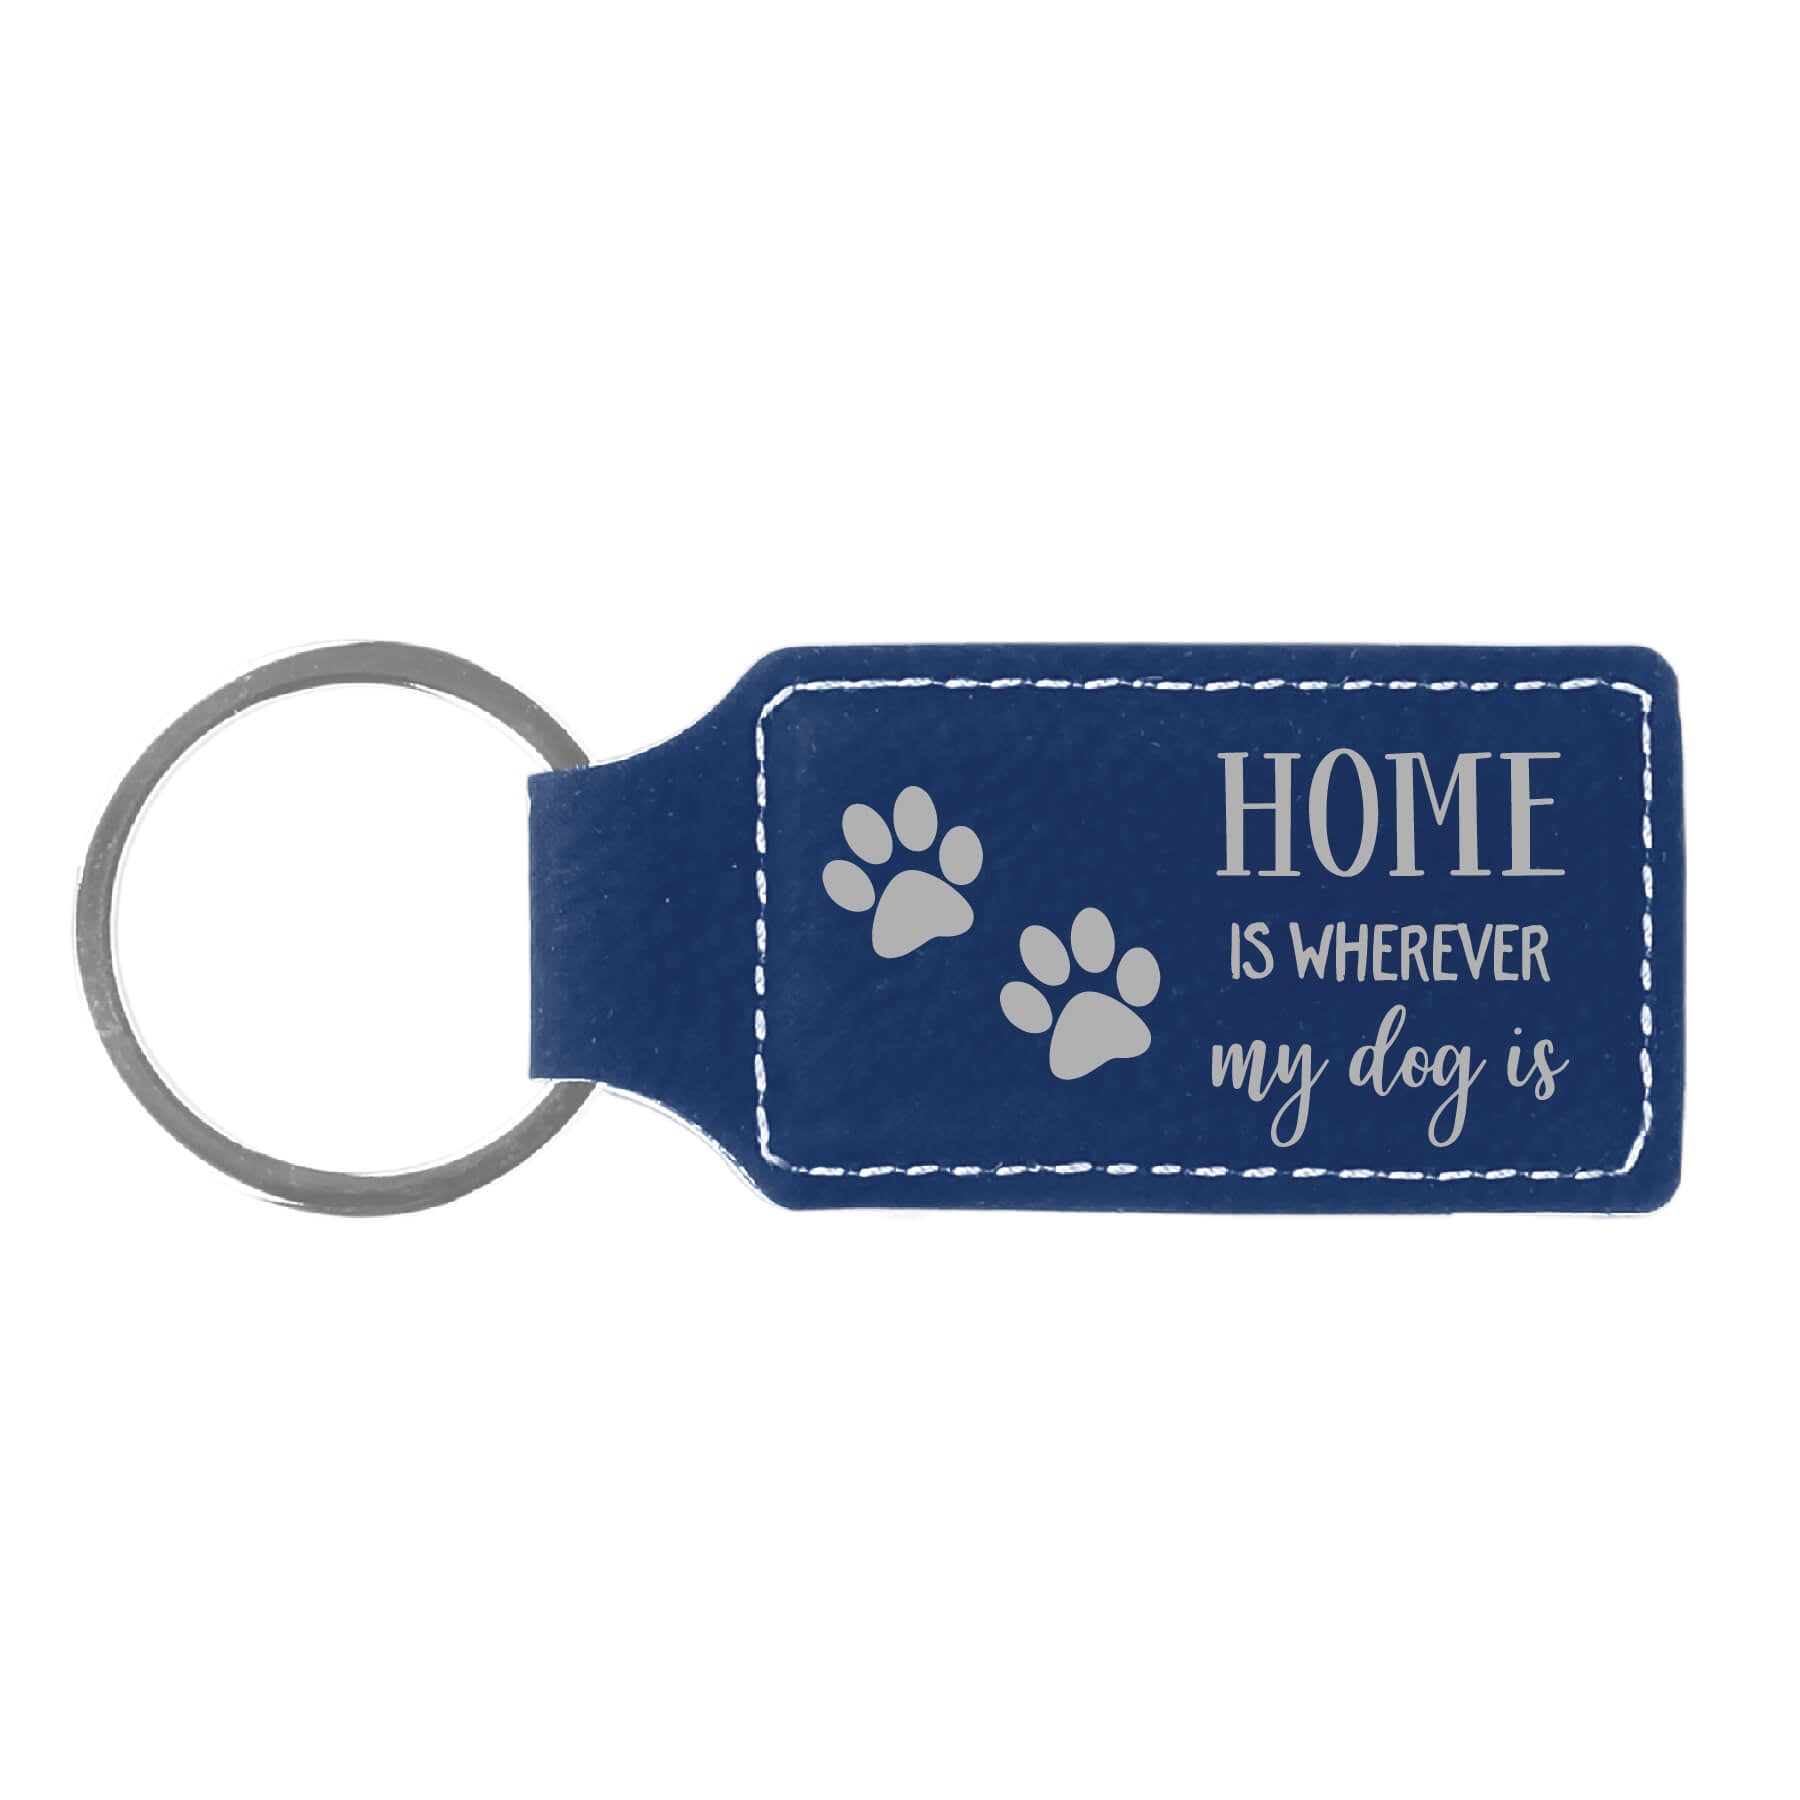 Home Is Wherever My Dog Is Keychain